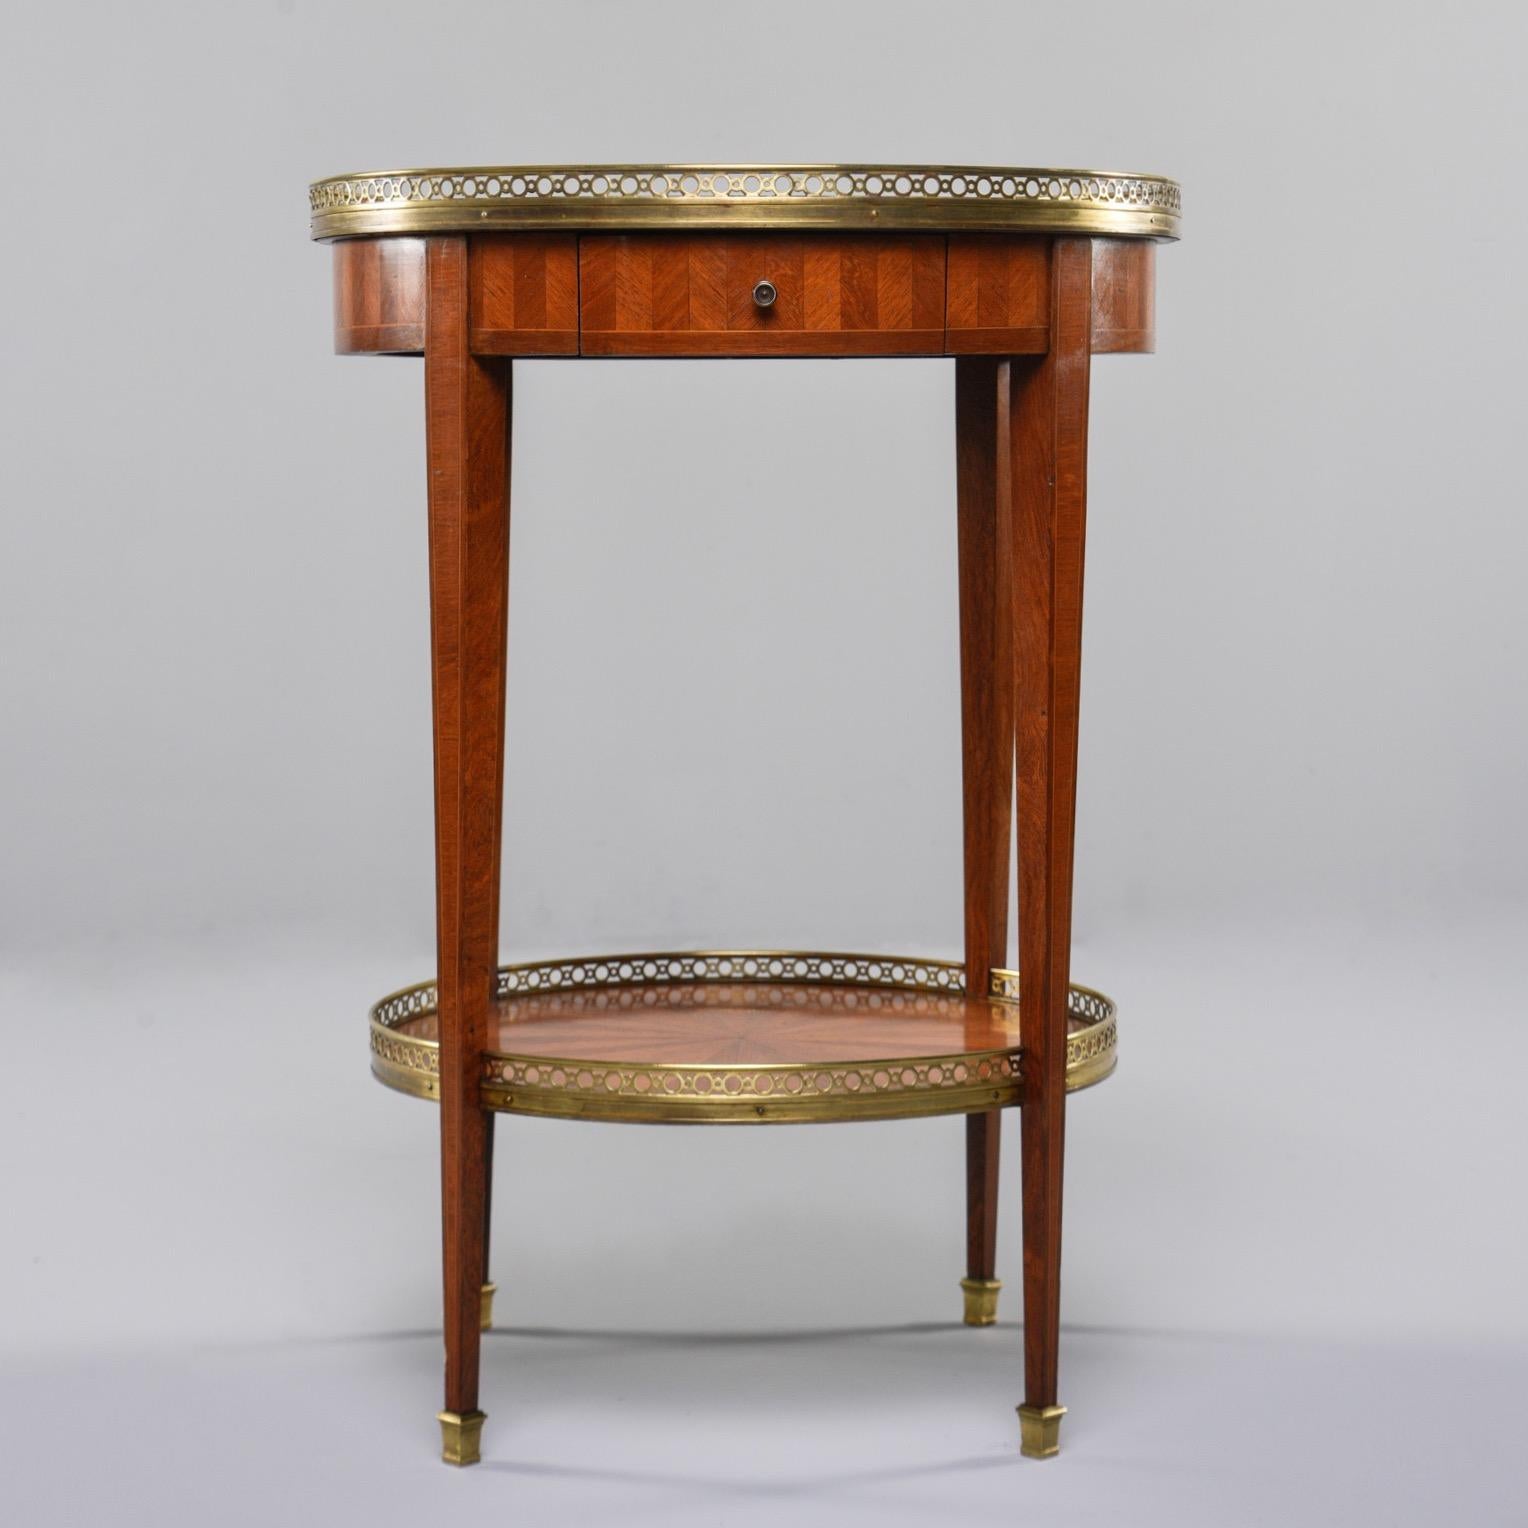 French walnut gueridon with extensive marquetry, circa 1900. Tabletop has checker board pattern, sides have a herringbone pattern and lower tier has a star burst pattern. Single functional drawer, pierced brass gallery on both tiers, and brass foot